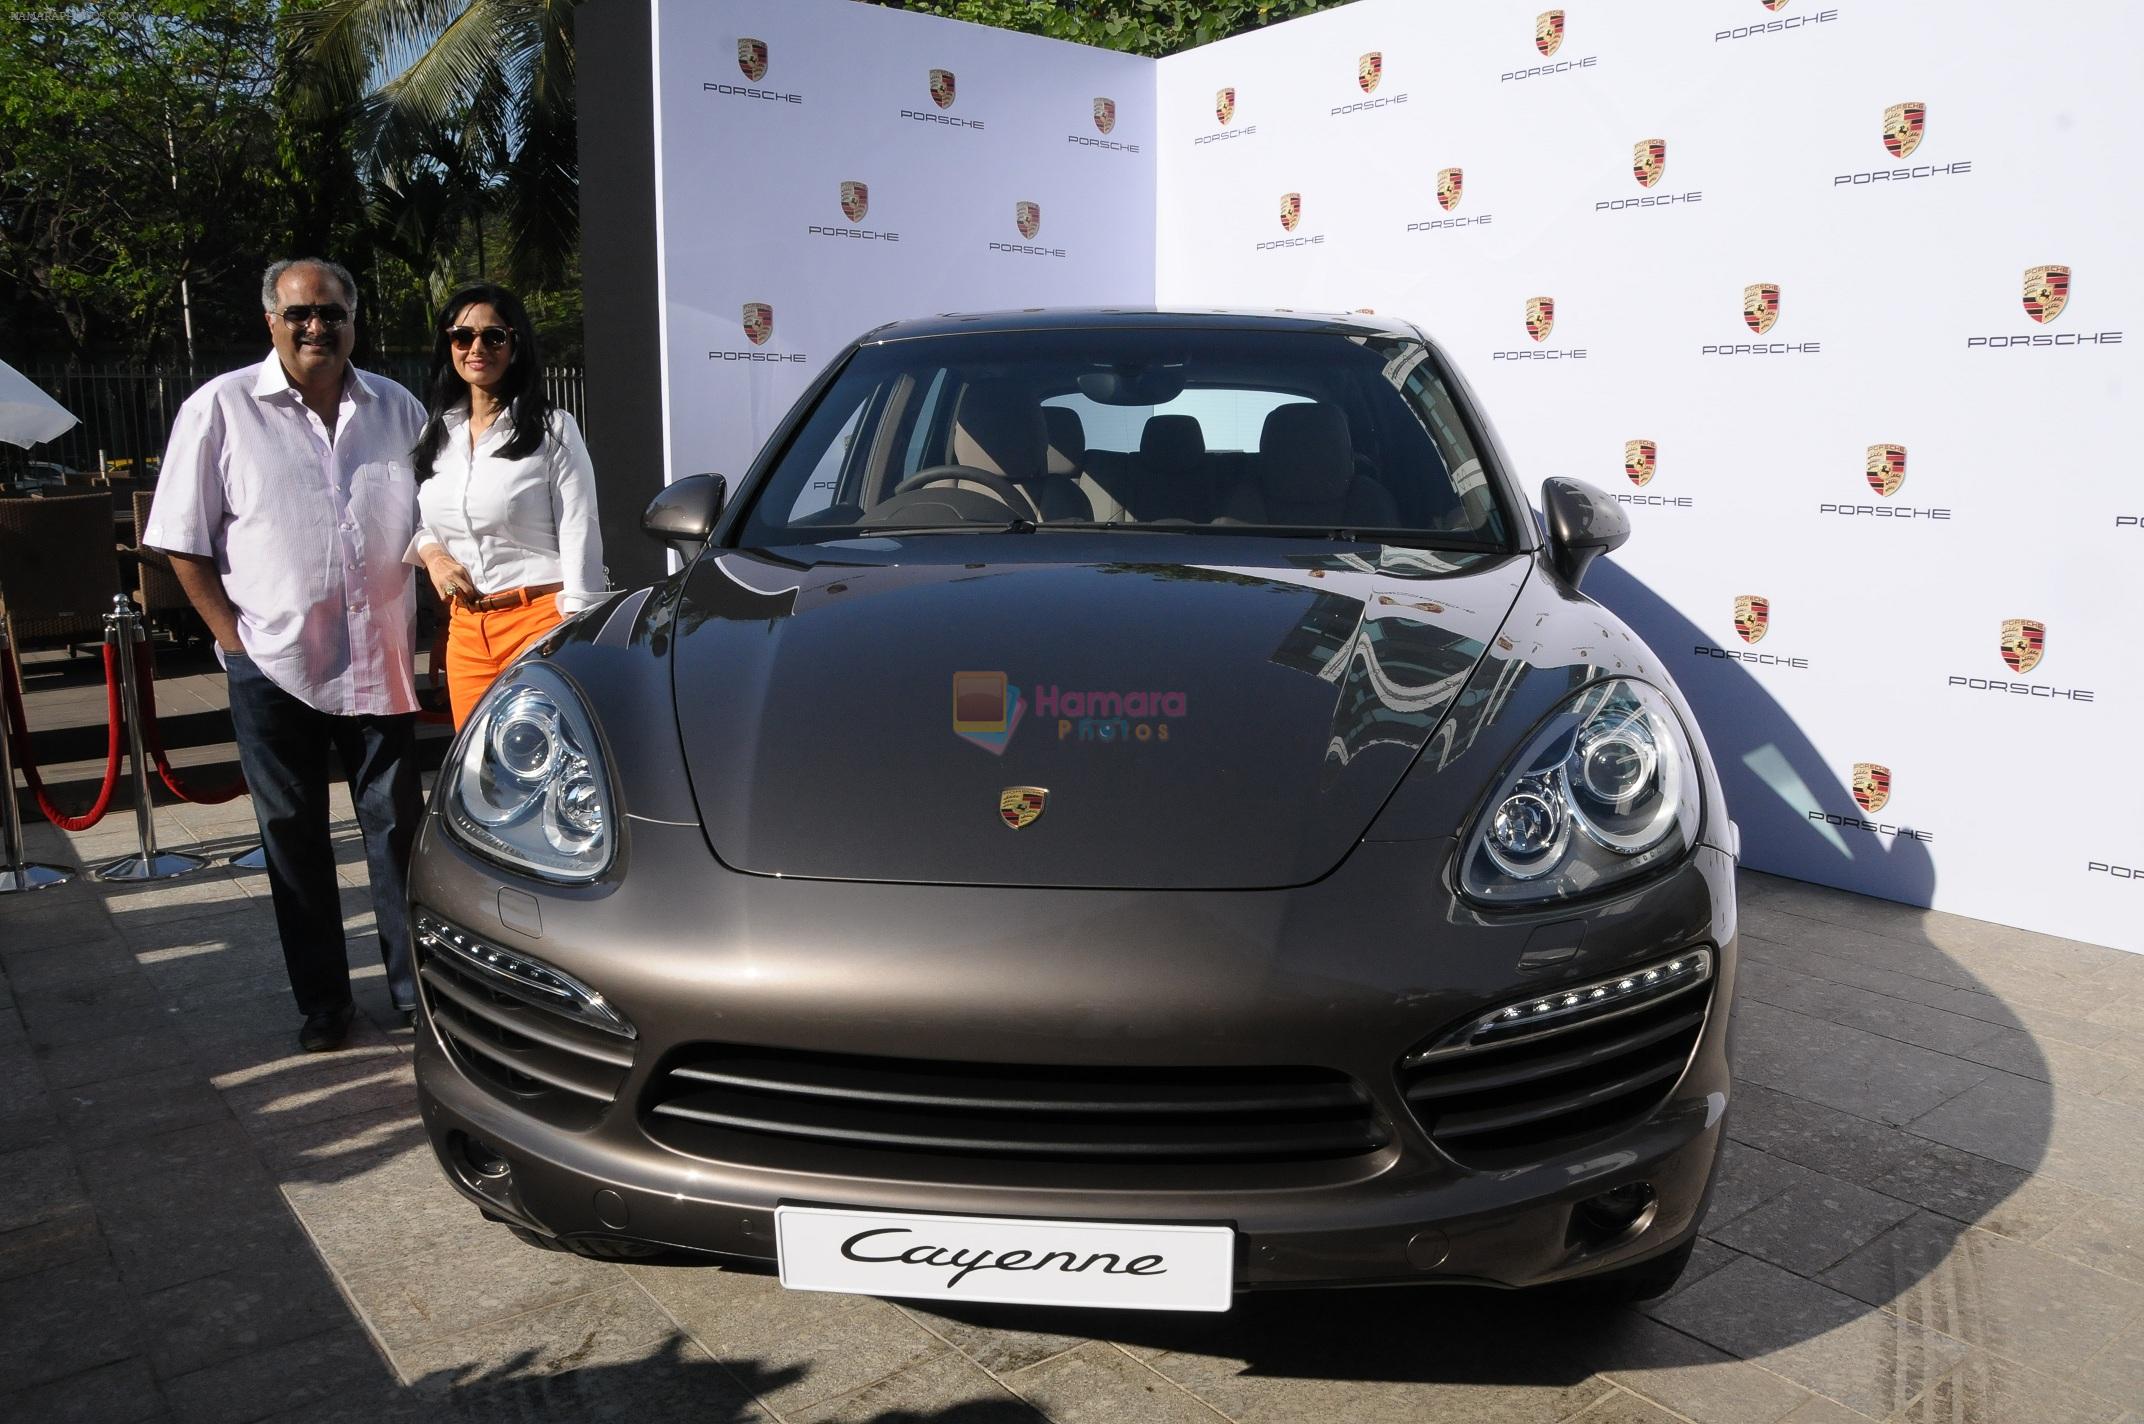 Sridevi gifts Boney Kapoor the 100th Porsche to be sold in India on 8th Nov 2012